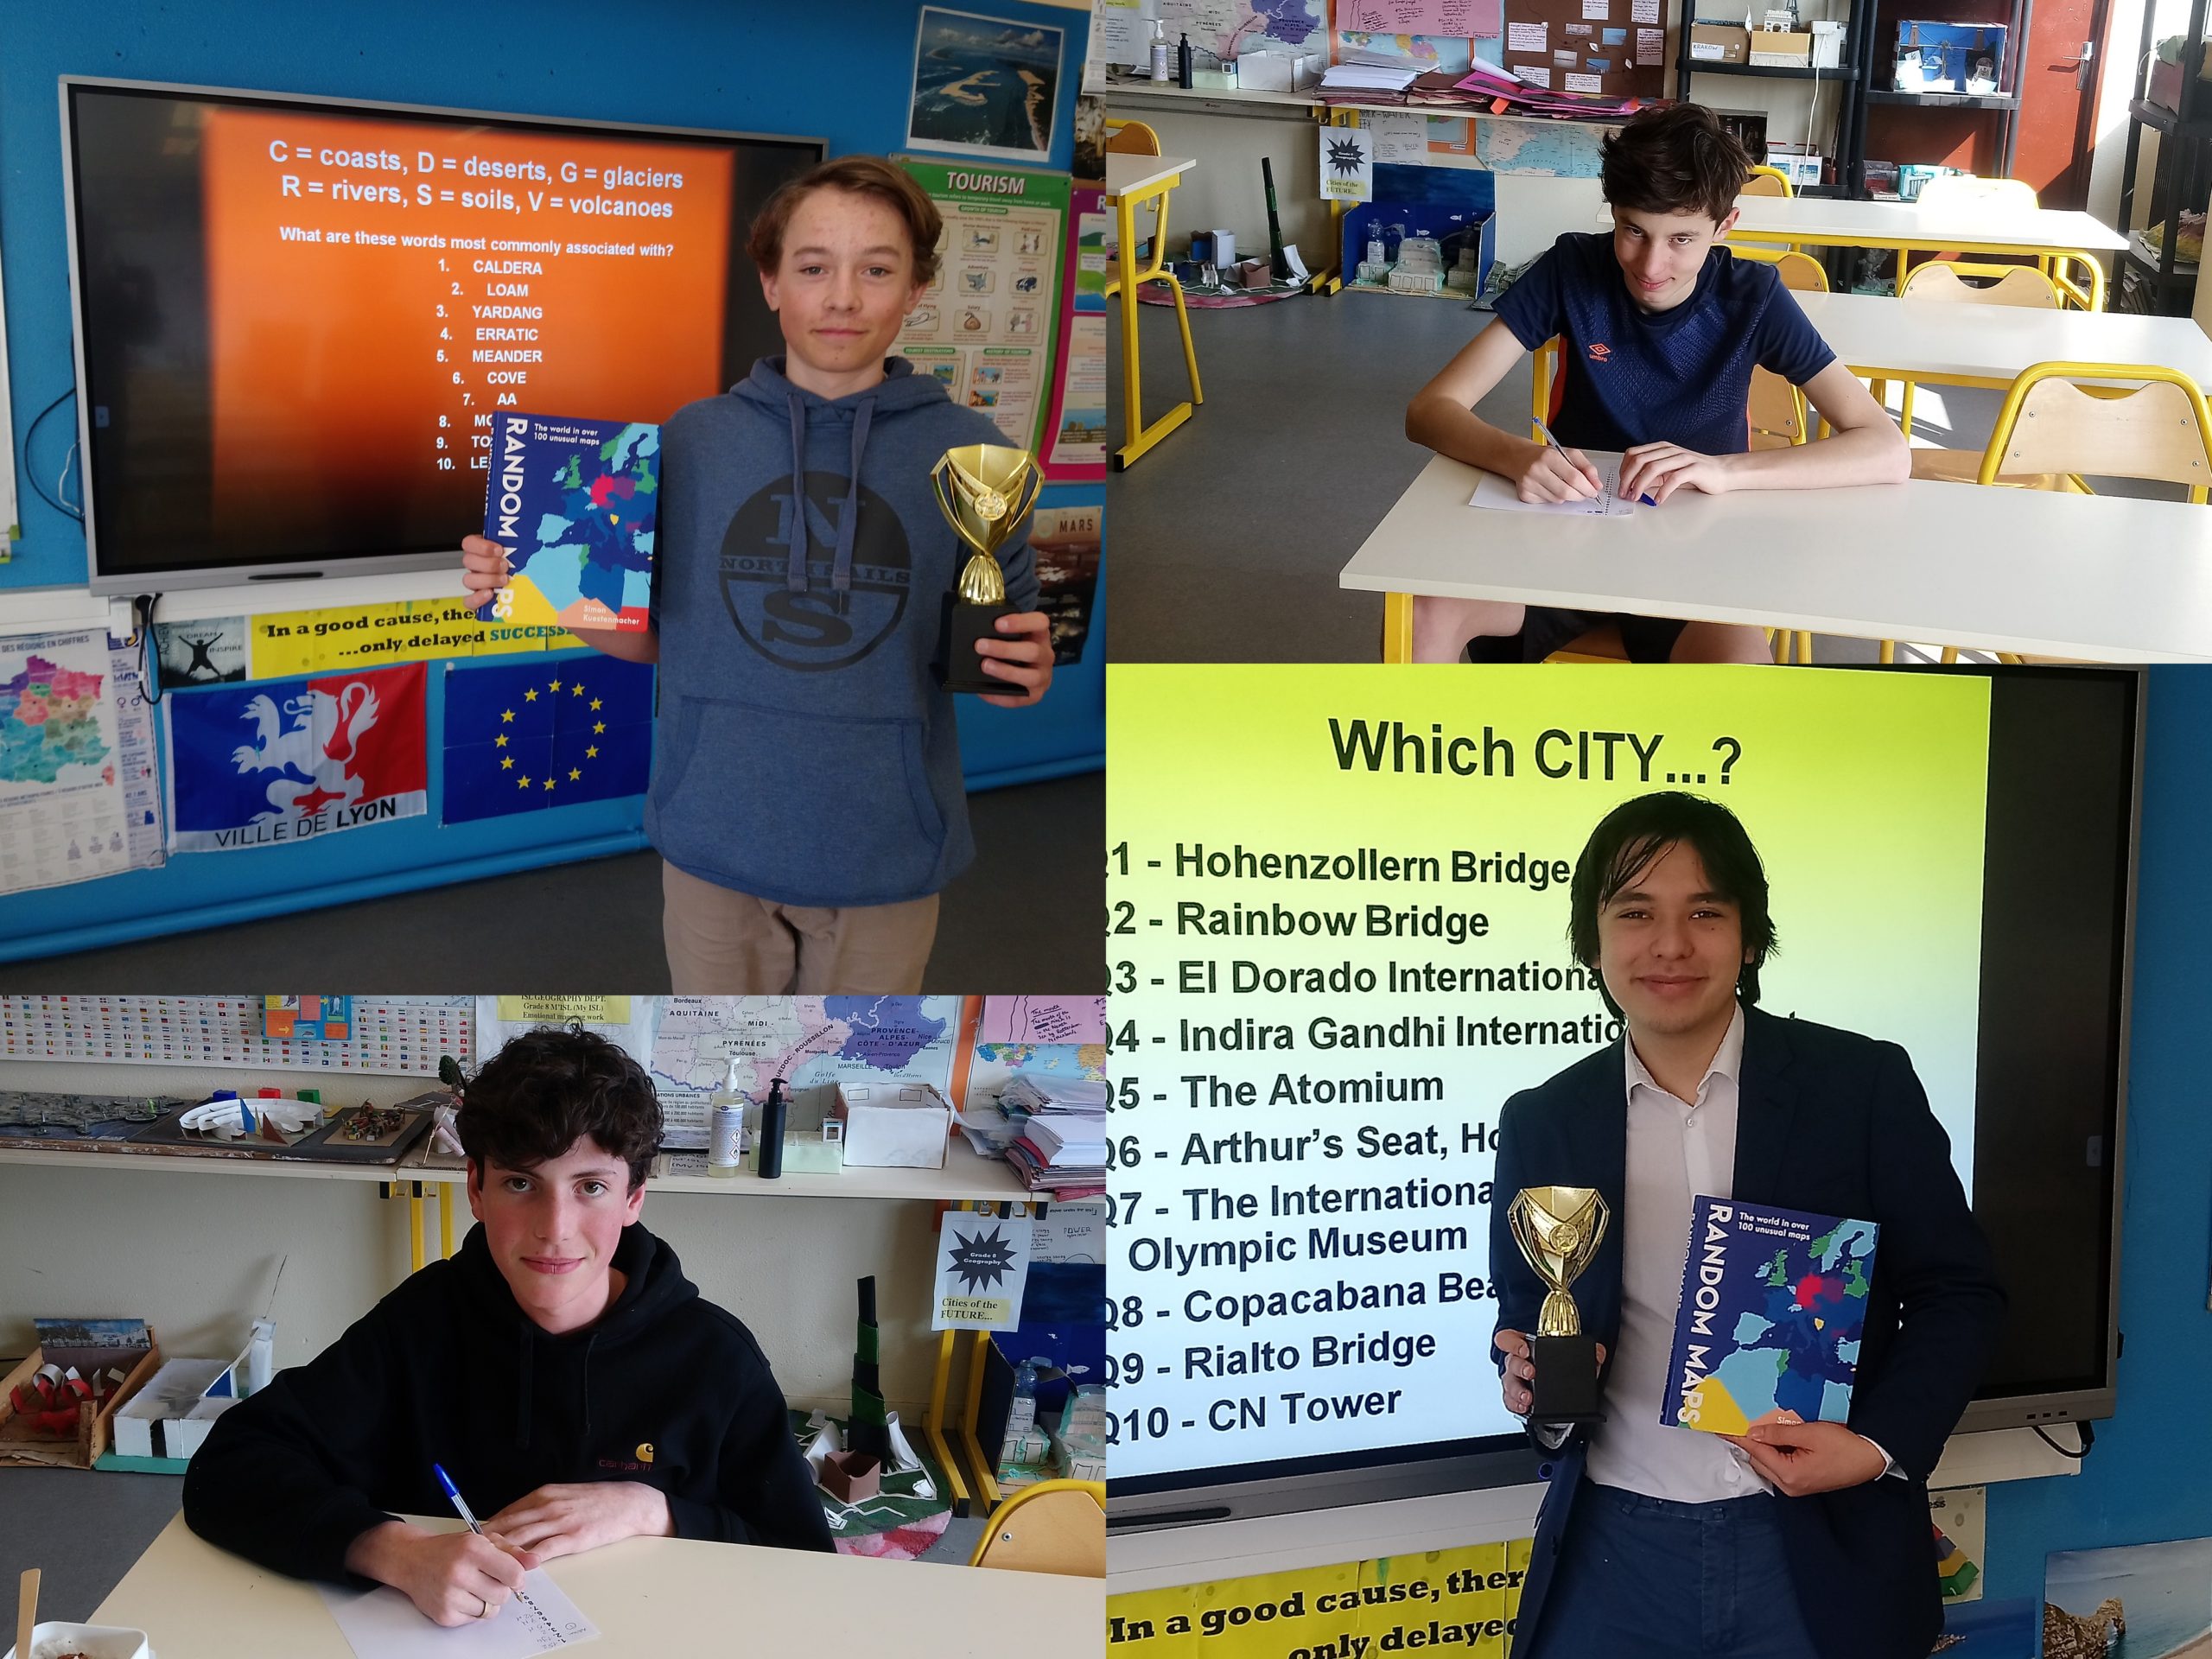 Portraits of the 2 winners of the ISL Geography Quiz holding trophies and the 2 other finalists